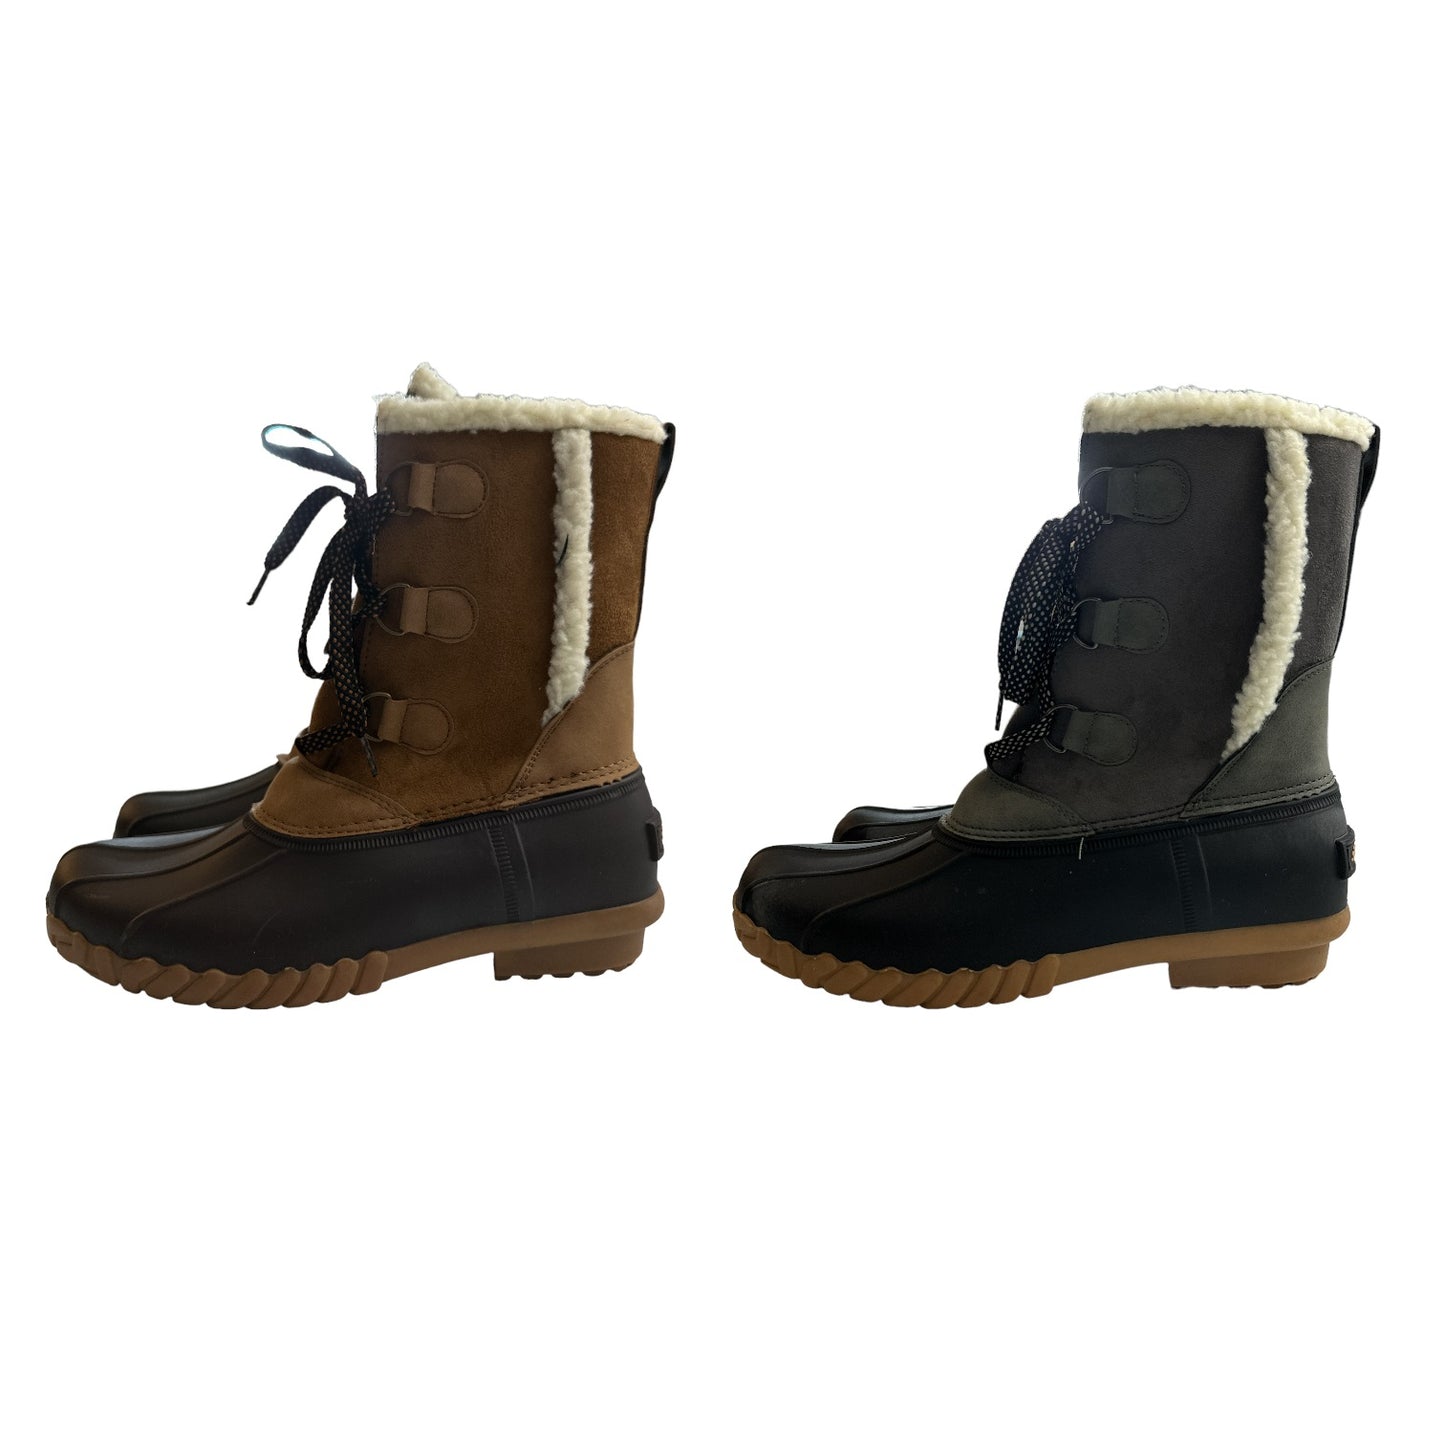 Eddie Bauer Women's Faux Fur Lined Comfort Footbed Duck Boots